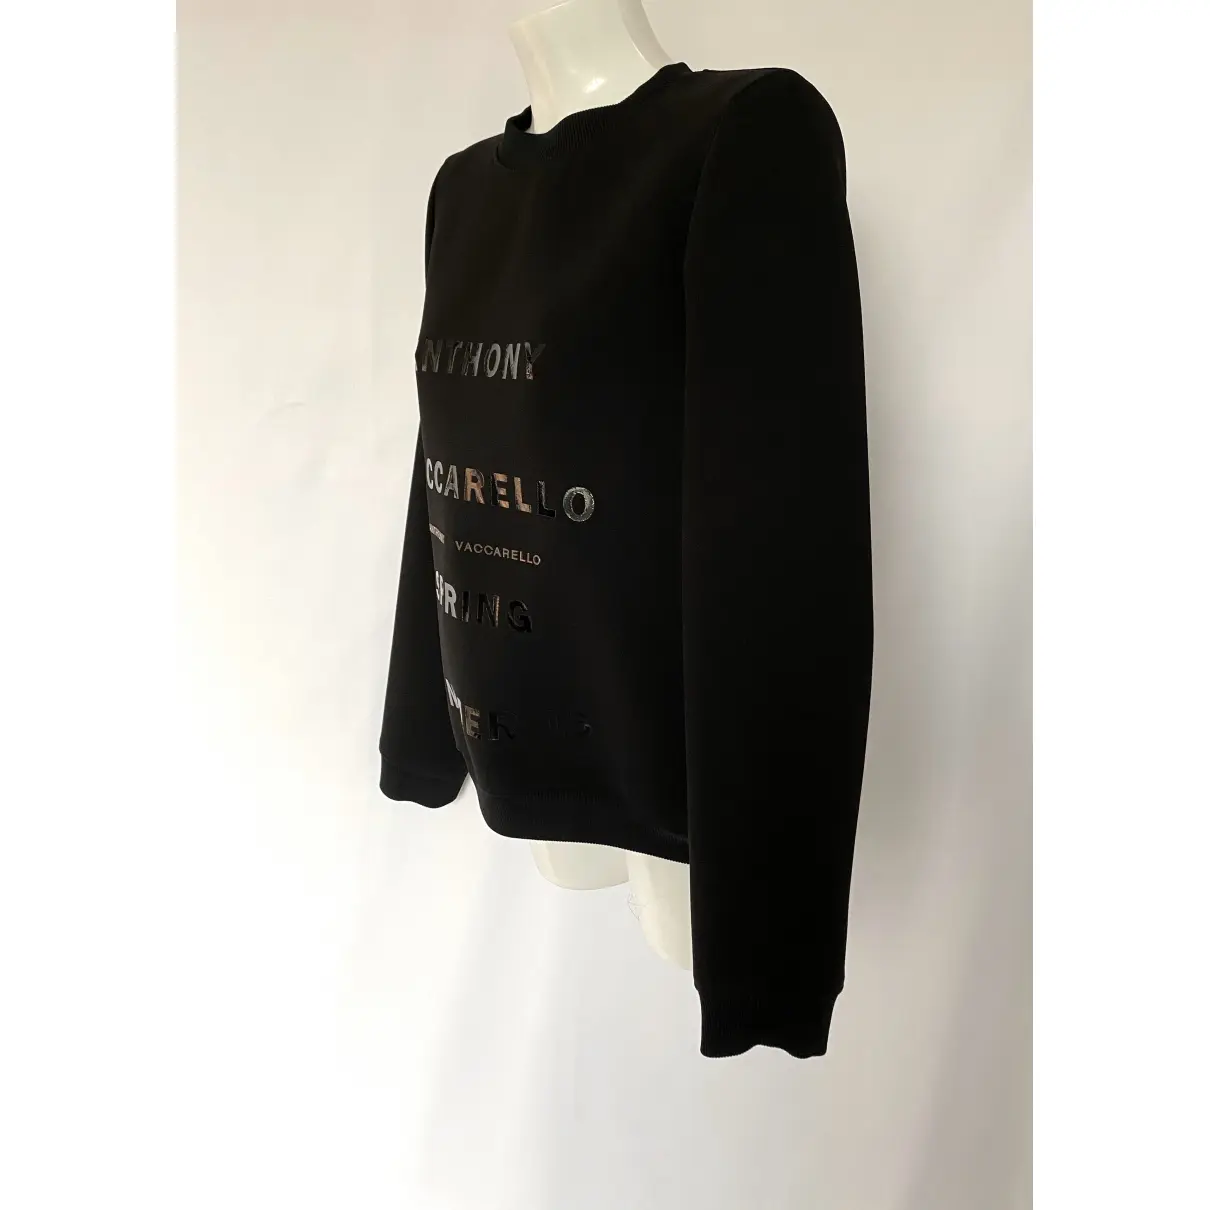 Buy Anthony Vaccarello Jumper online